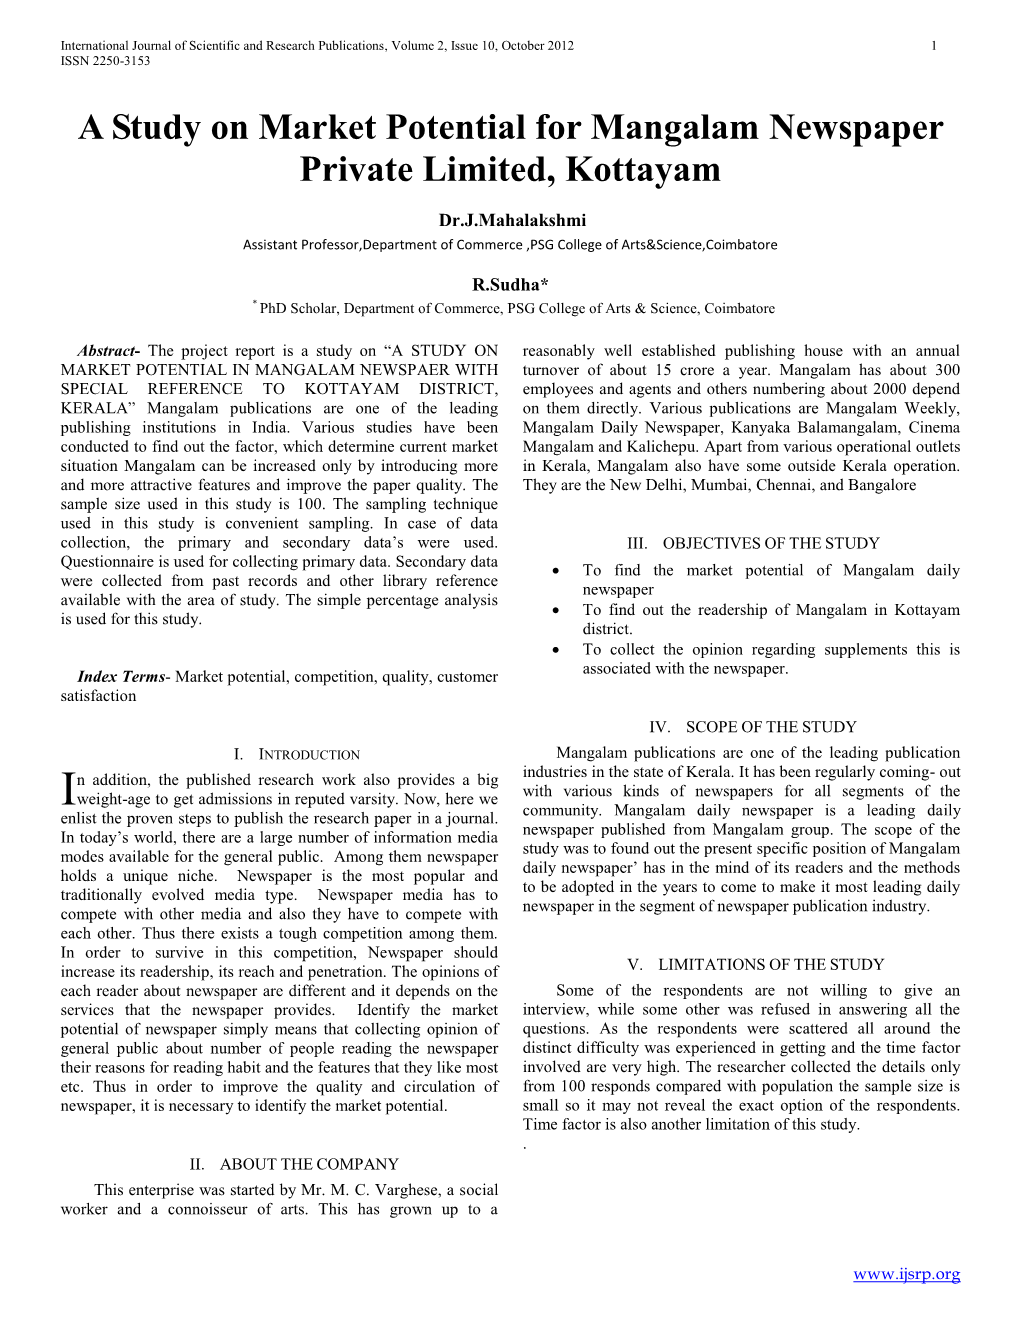 A Study on Market Potential for Mangalam Newspaper Private Limited, Kottayam